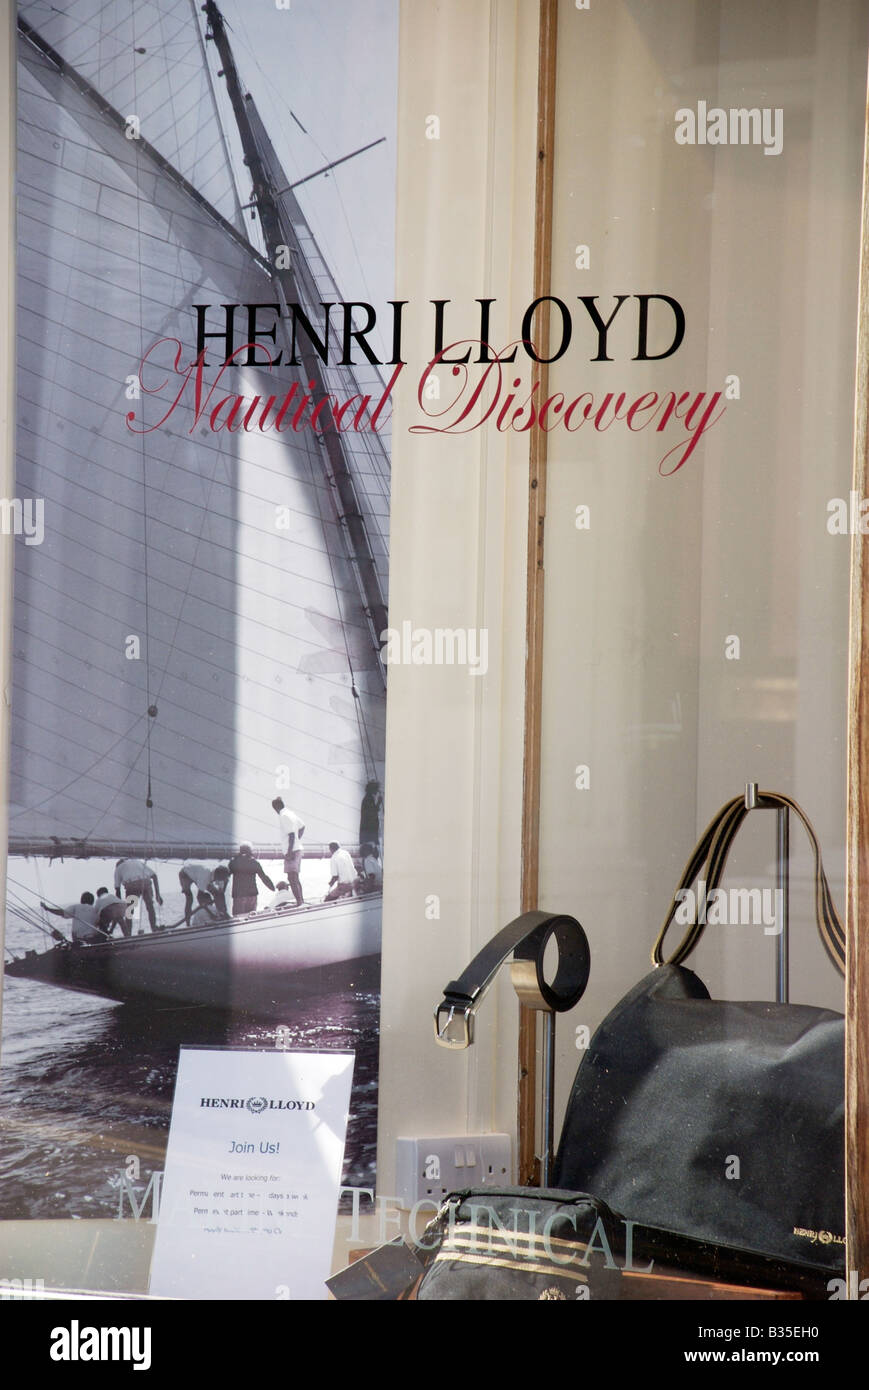 Henri Lloyd High Resolution Stock Photography and Images - Alamy